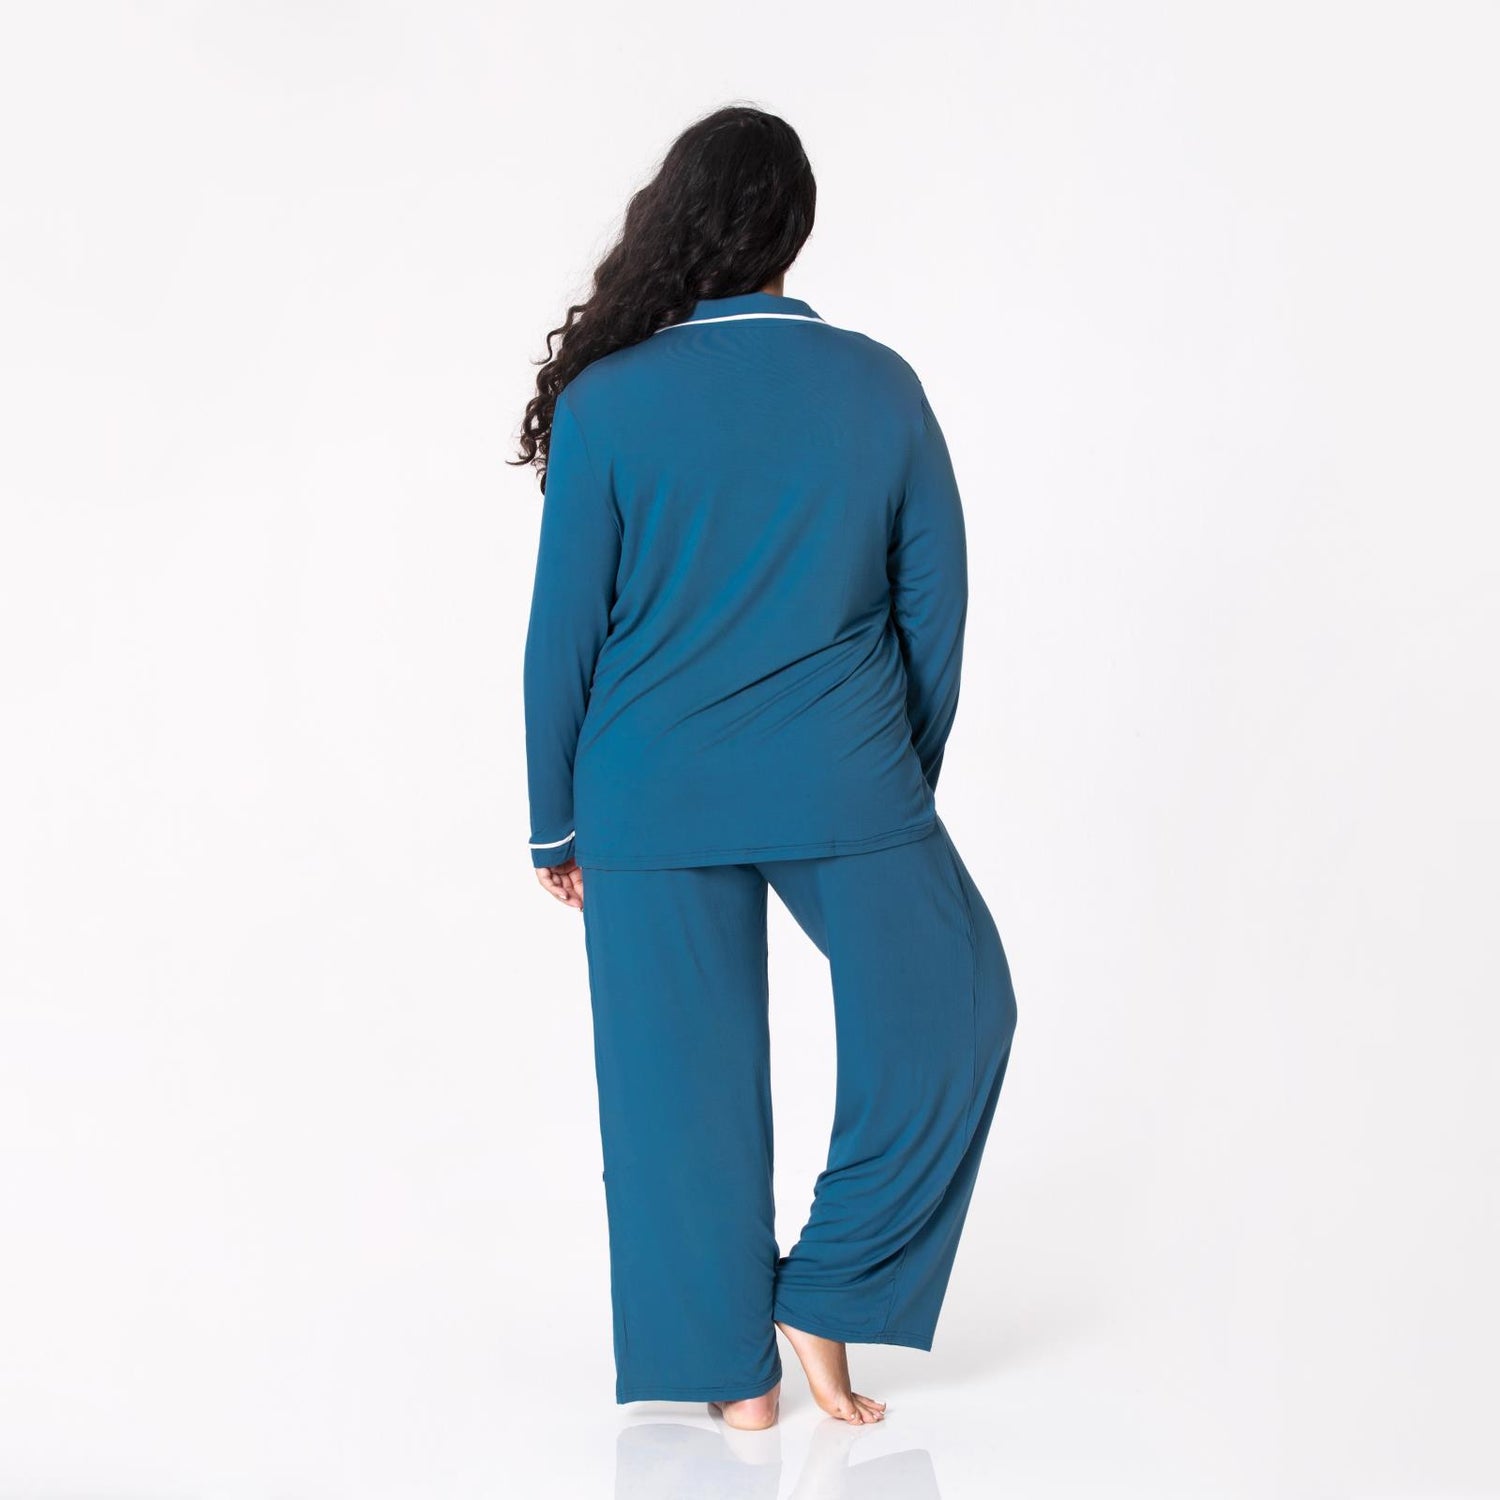 Women's Long Sleeved Collared Pajama Set in Deep Sea with Natural